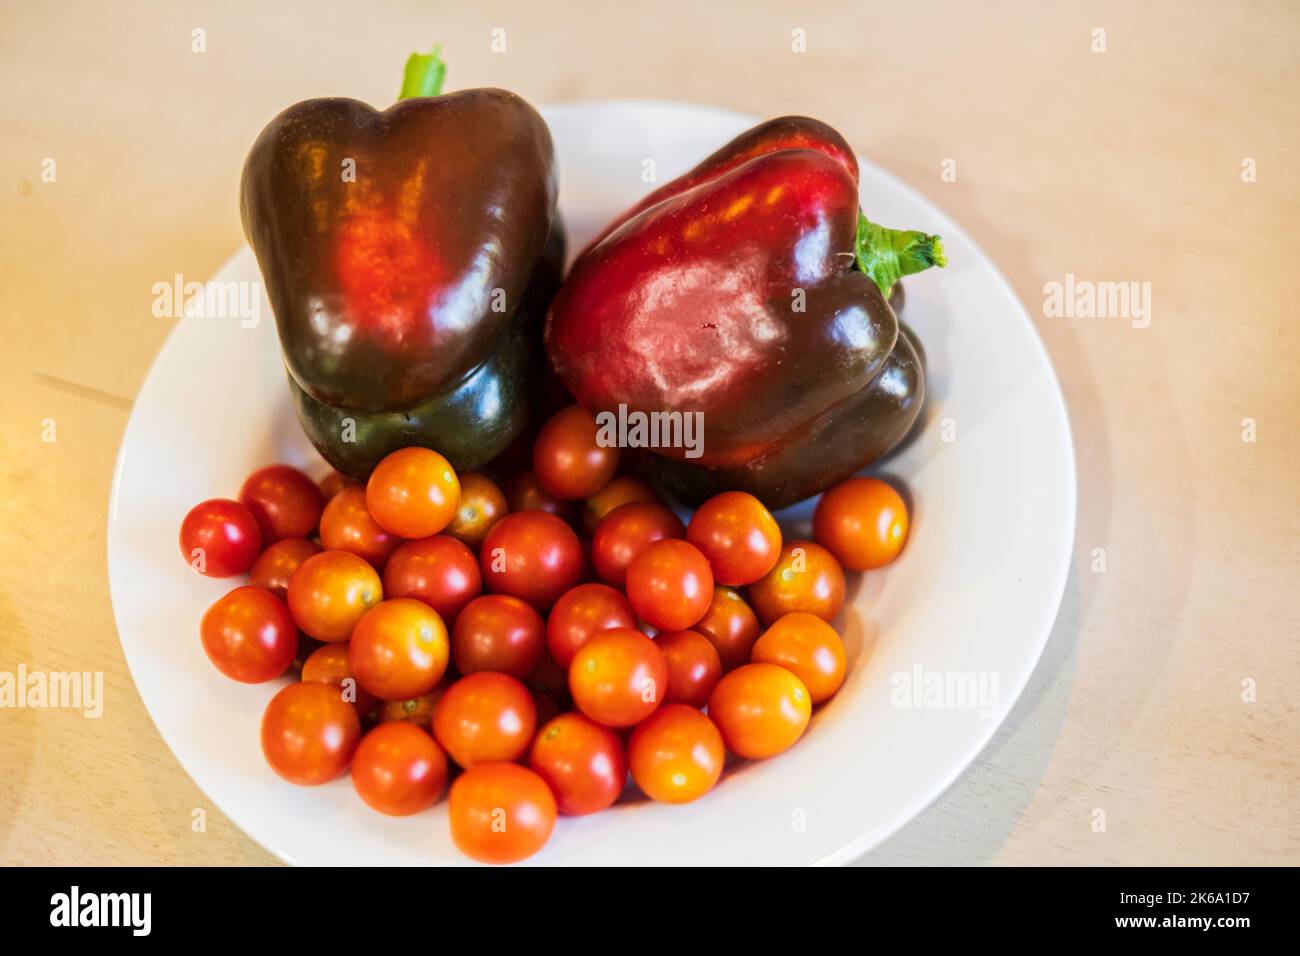 Cherry tomatoes or grape tomatoes. Home grown. Indeterminate, hybrid cultivar. Super Sweet 100 variety, with red bell peppers, Capsicum annuum. Stock Photo